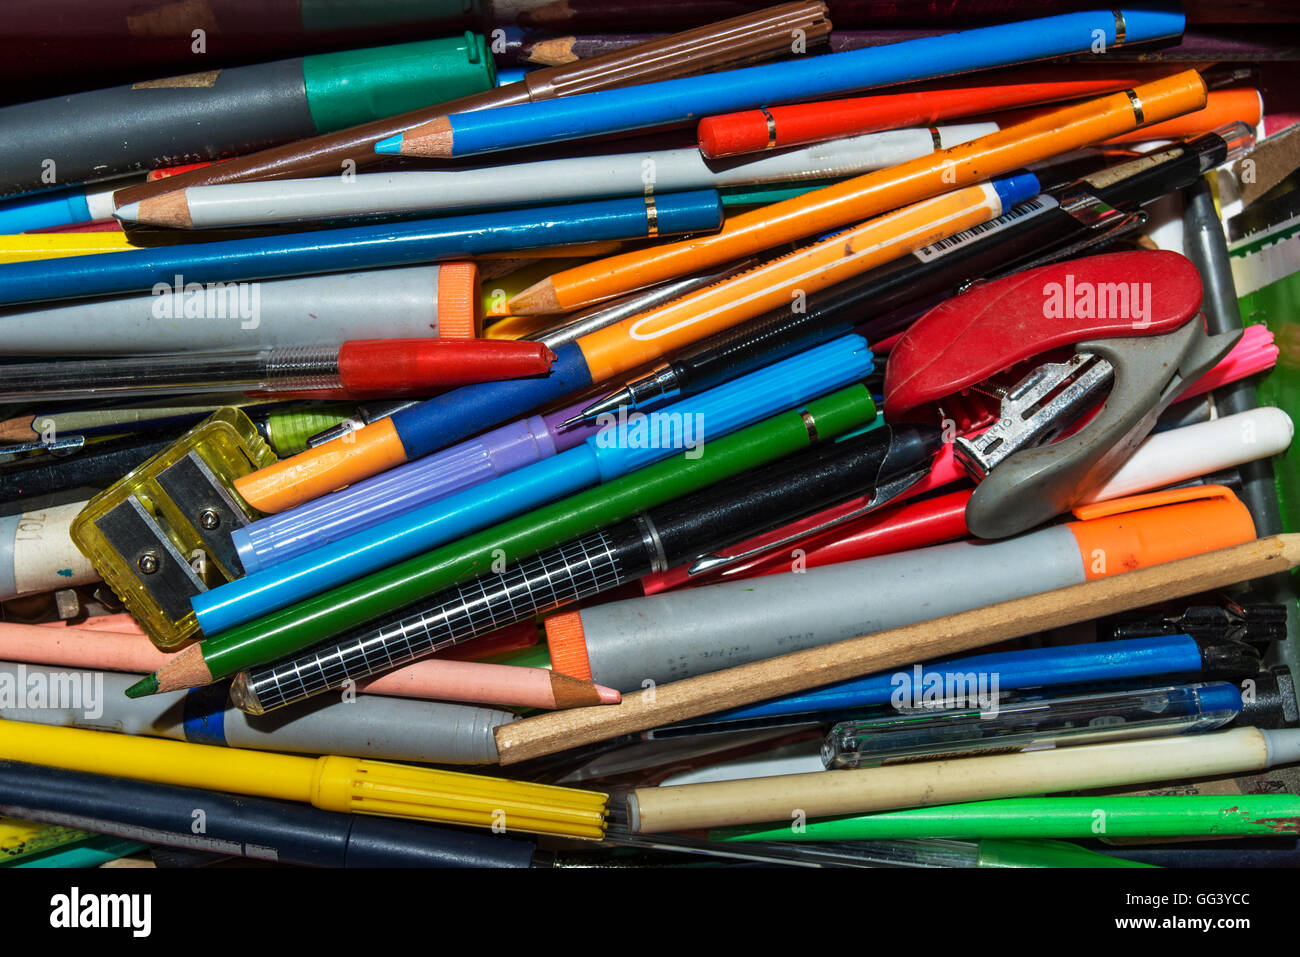 many school supplies, pencils, markers, pencil sharpeners and others placed as background Stock Photo